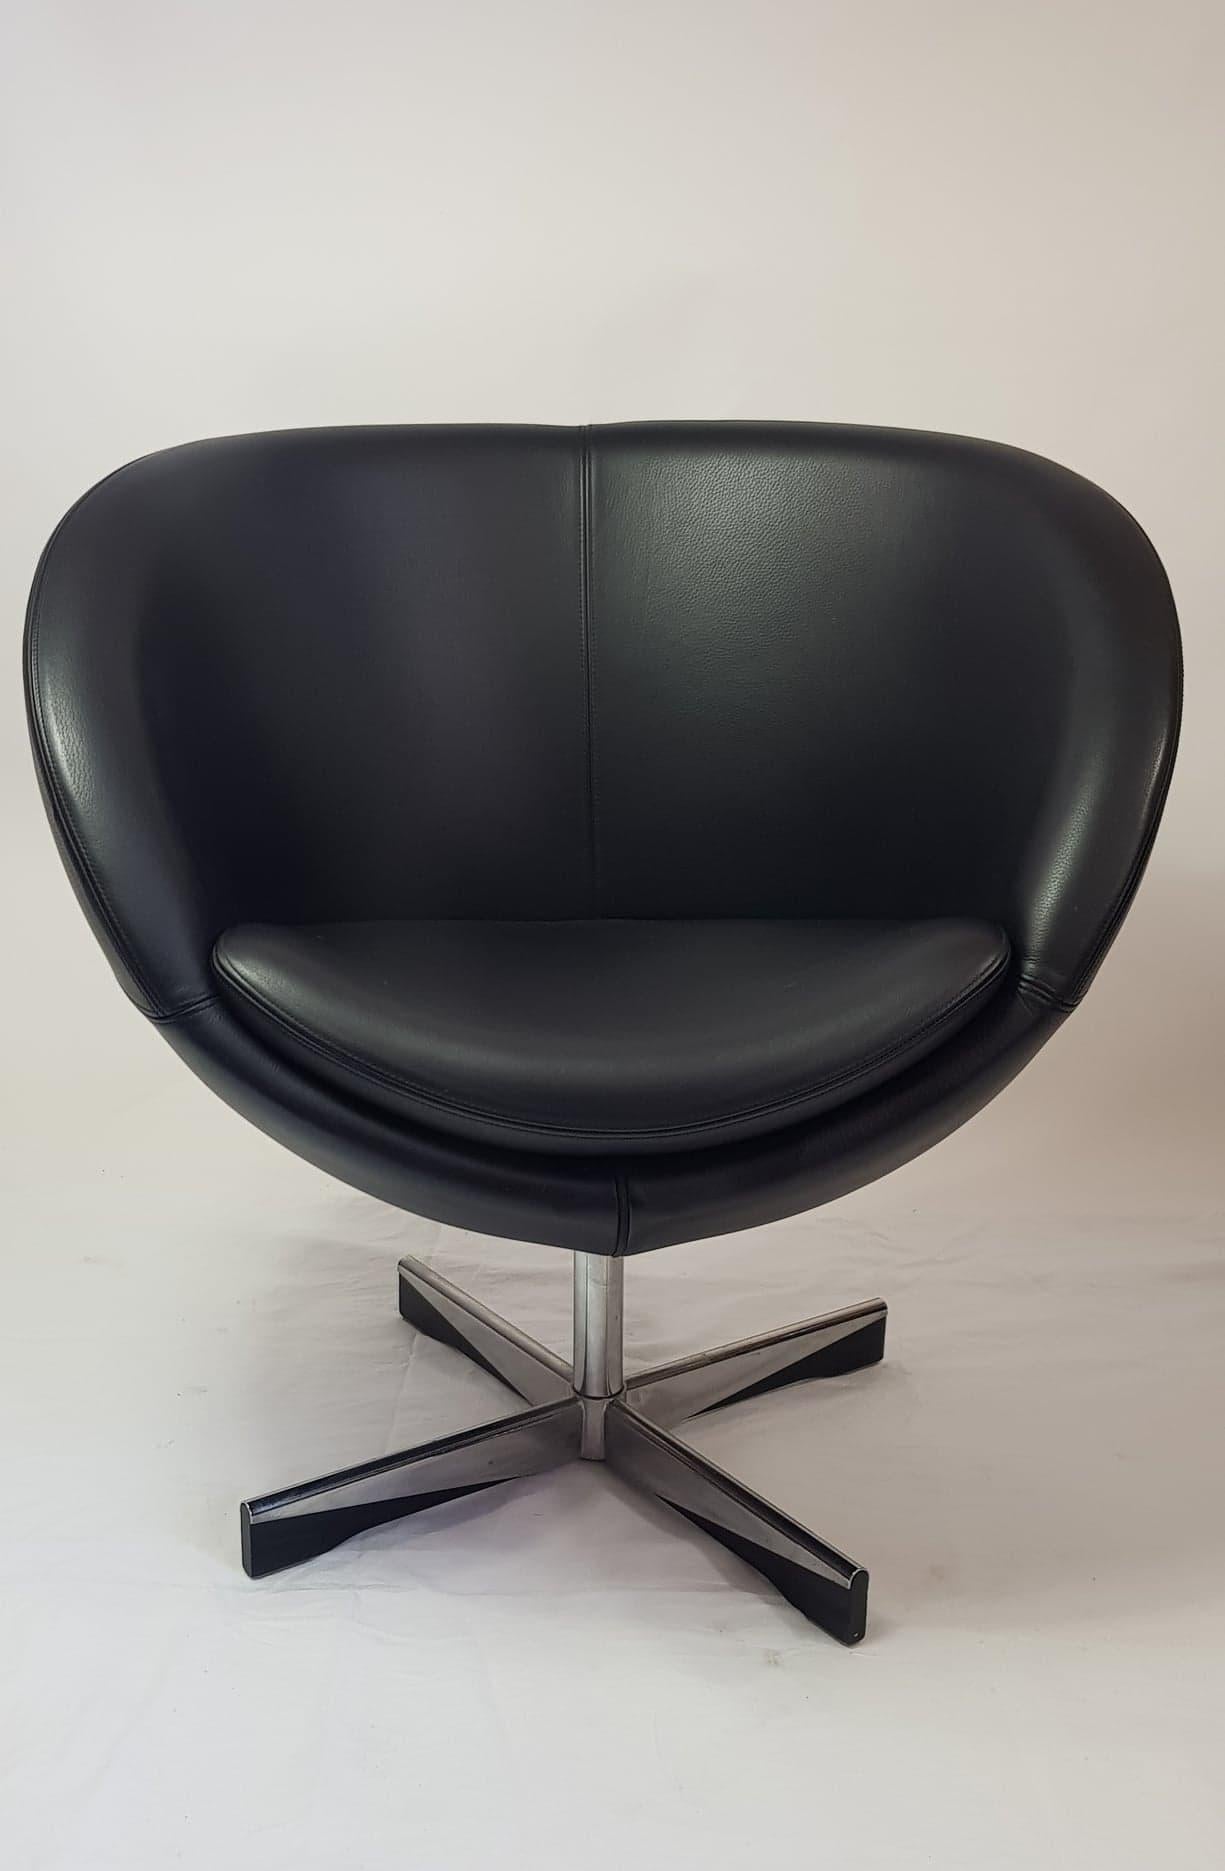 Designed by Sven Ivar Dysthe and manufactured by Stokke in Norway. The planet has now become an icon of Scandinavian design. The black leather upholstery covering the spheroidal seat and padded arms, as well as a removable seat cushion is of a high